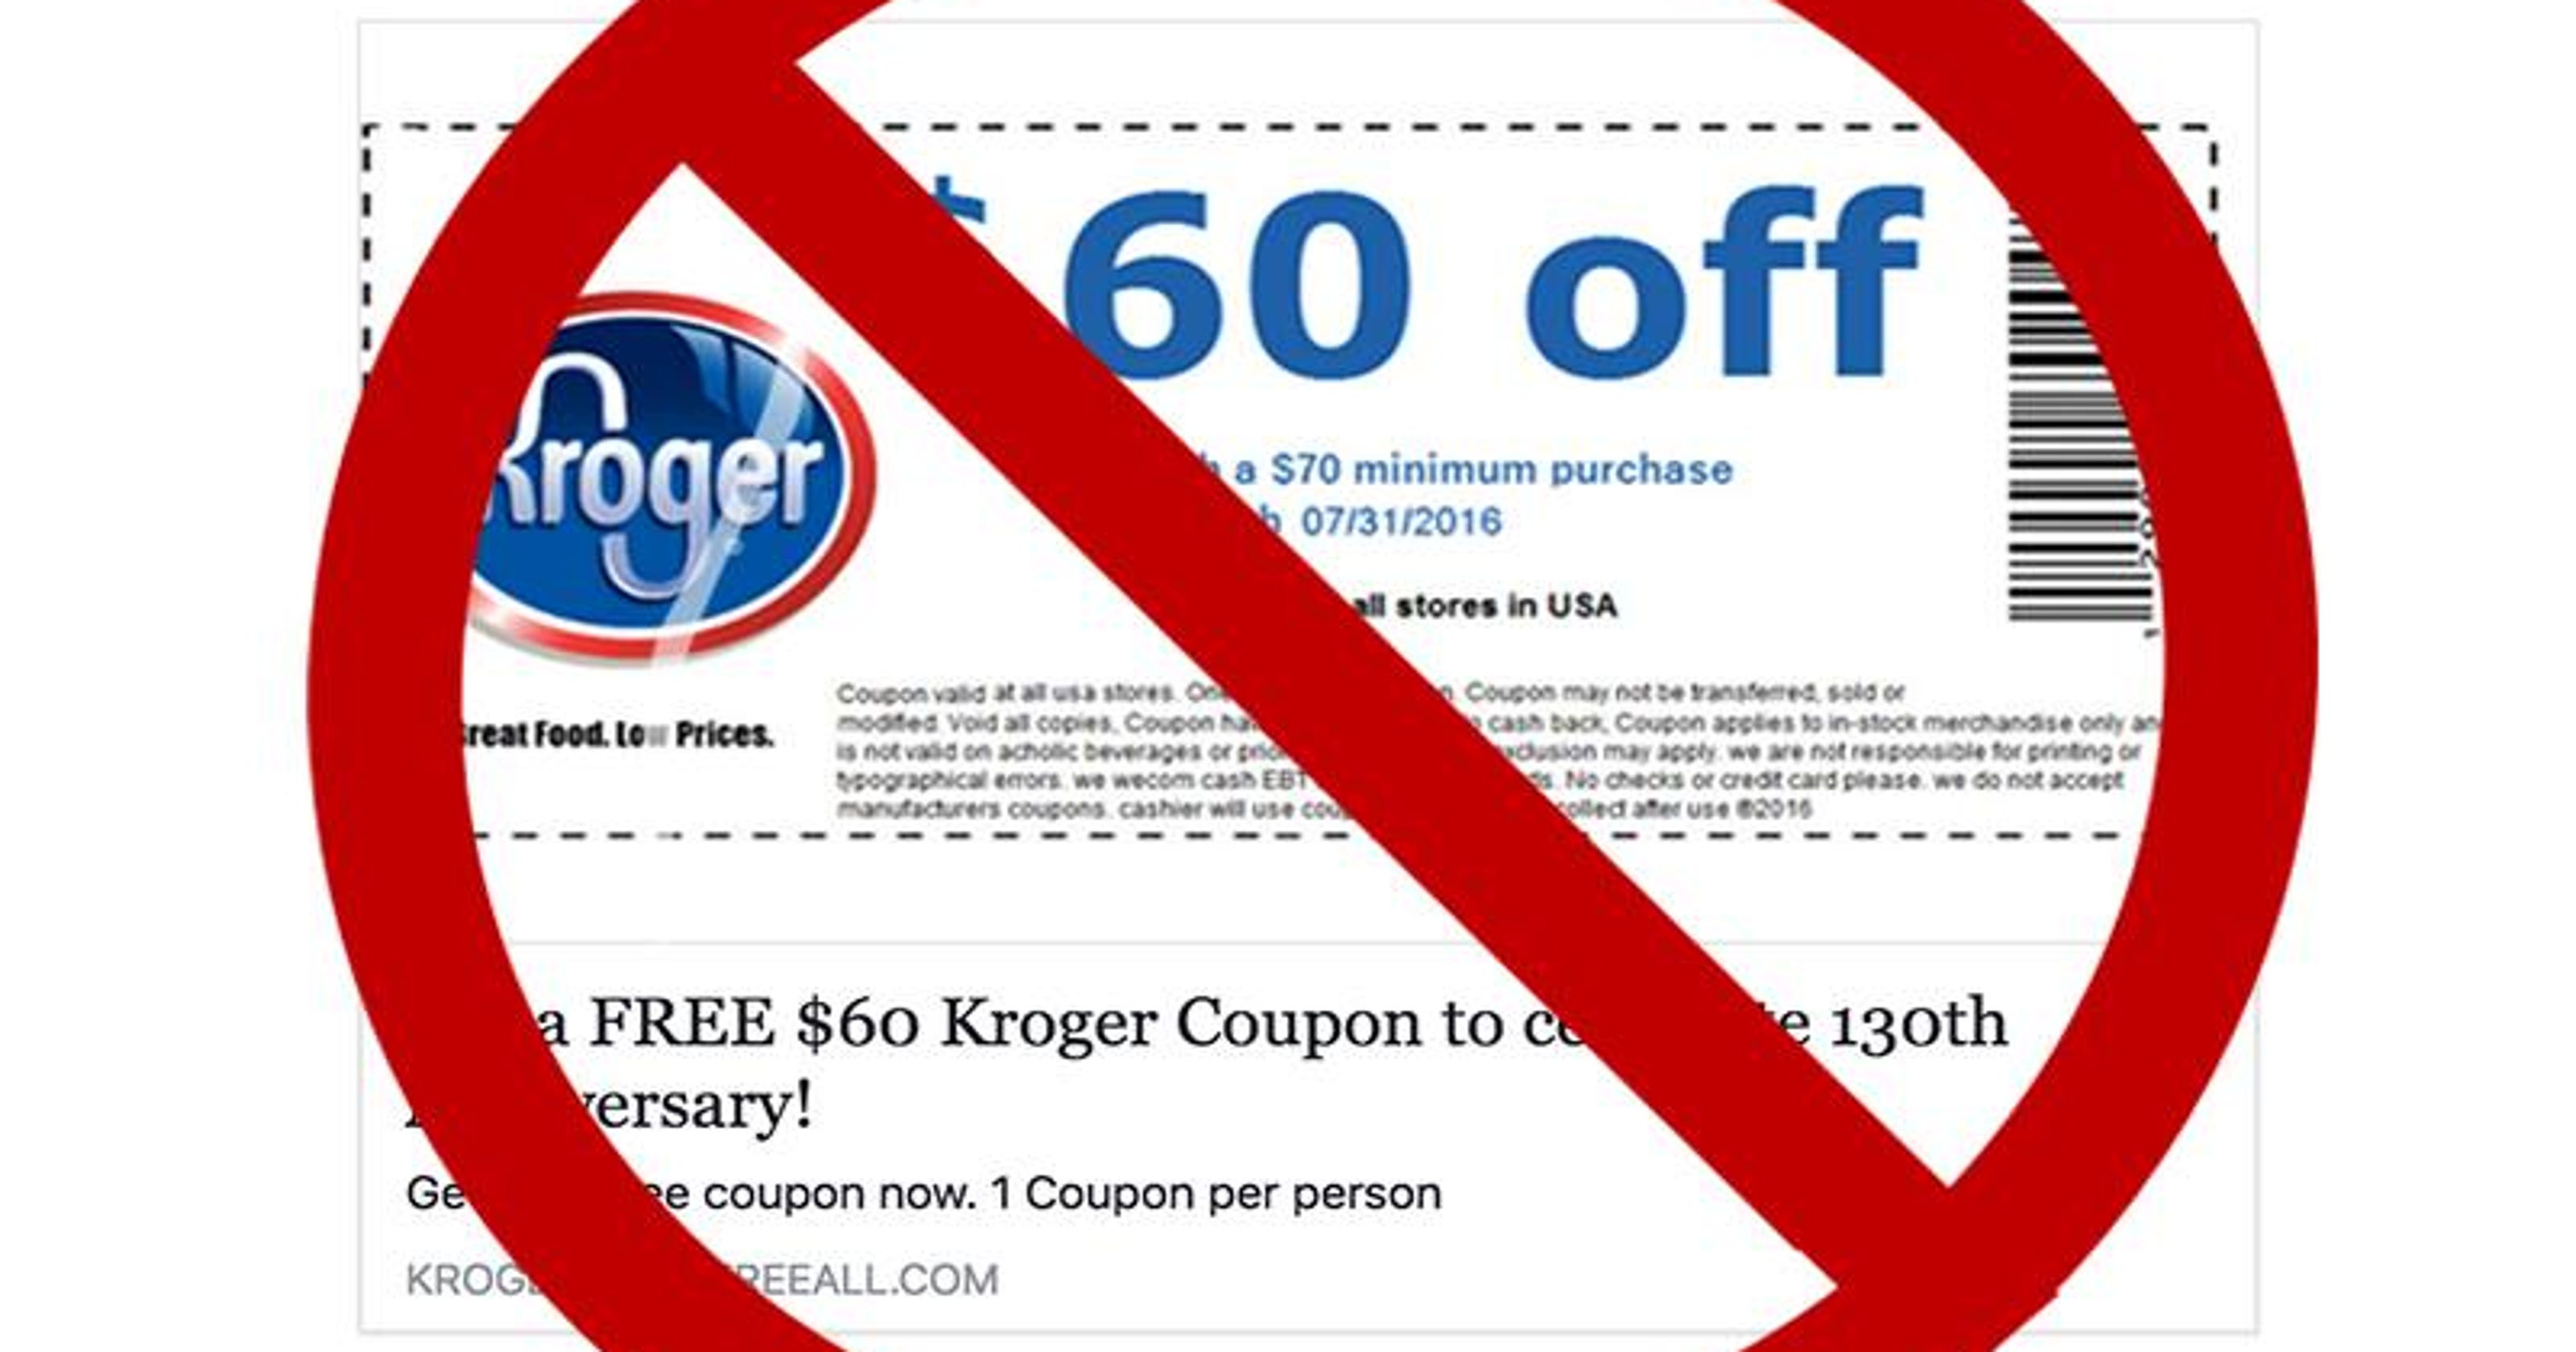 kroger-free-groceries-coupon-is-facebook-hoax